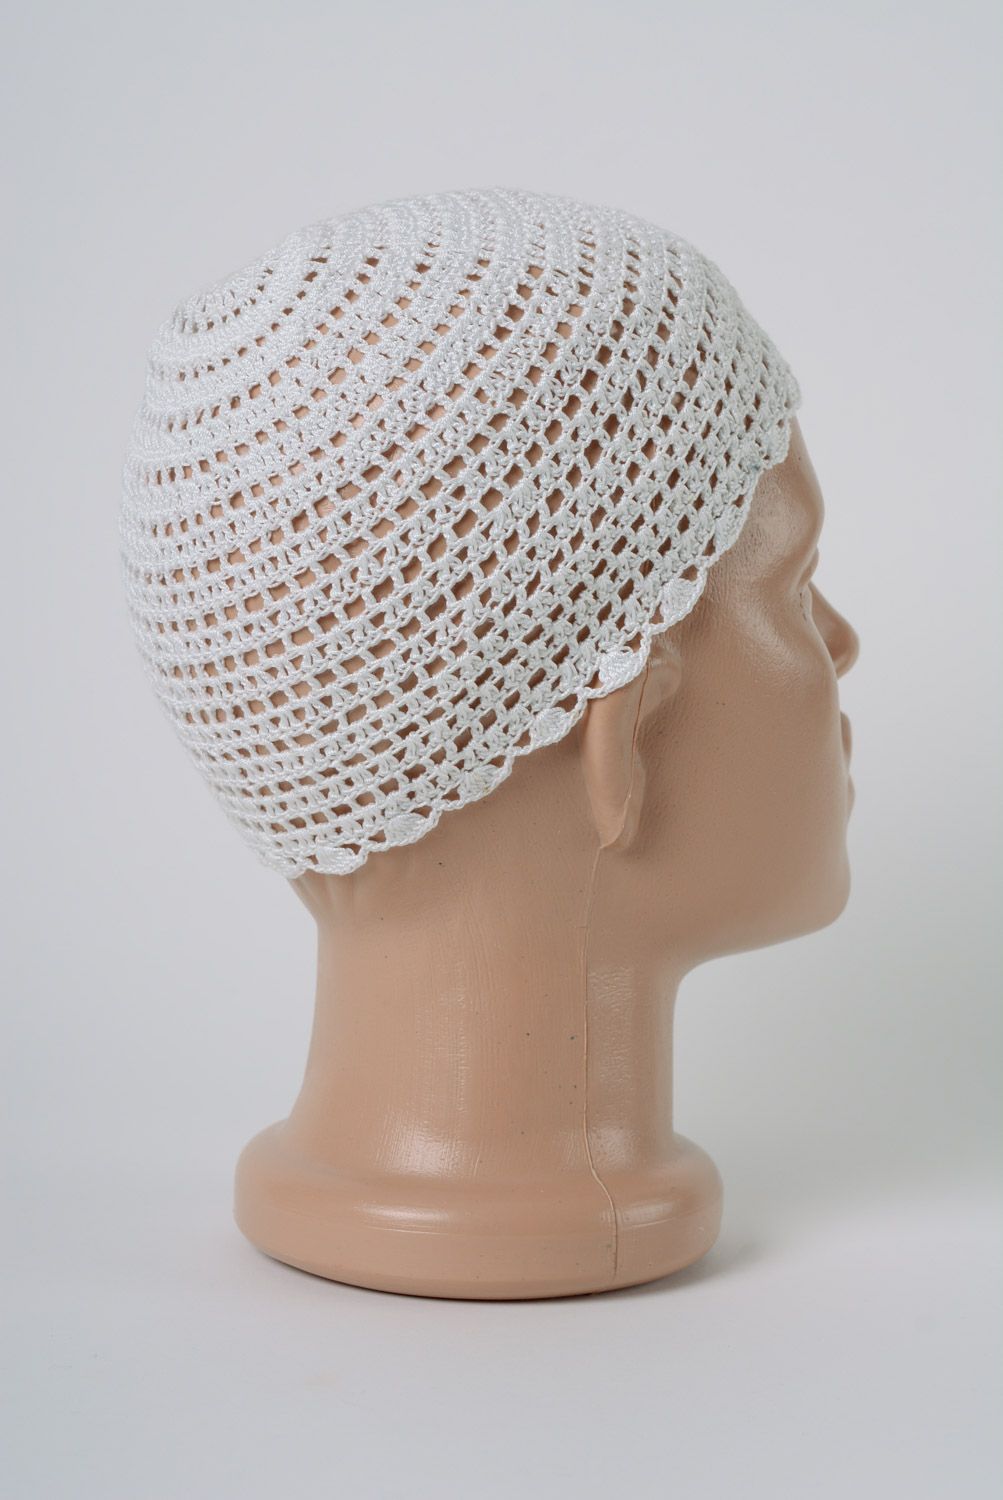 Handmade white lacy hat crocheted of cotton threads with flowers and beads photo 3